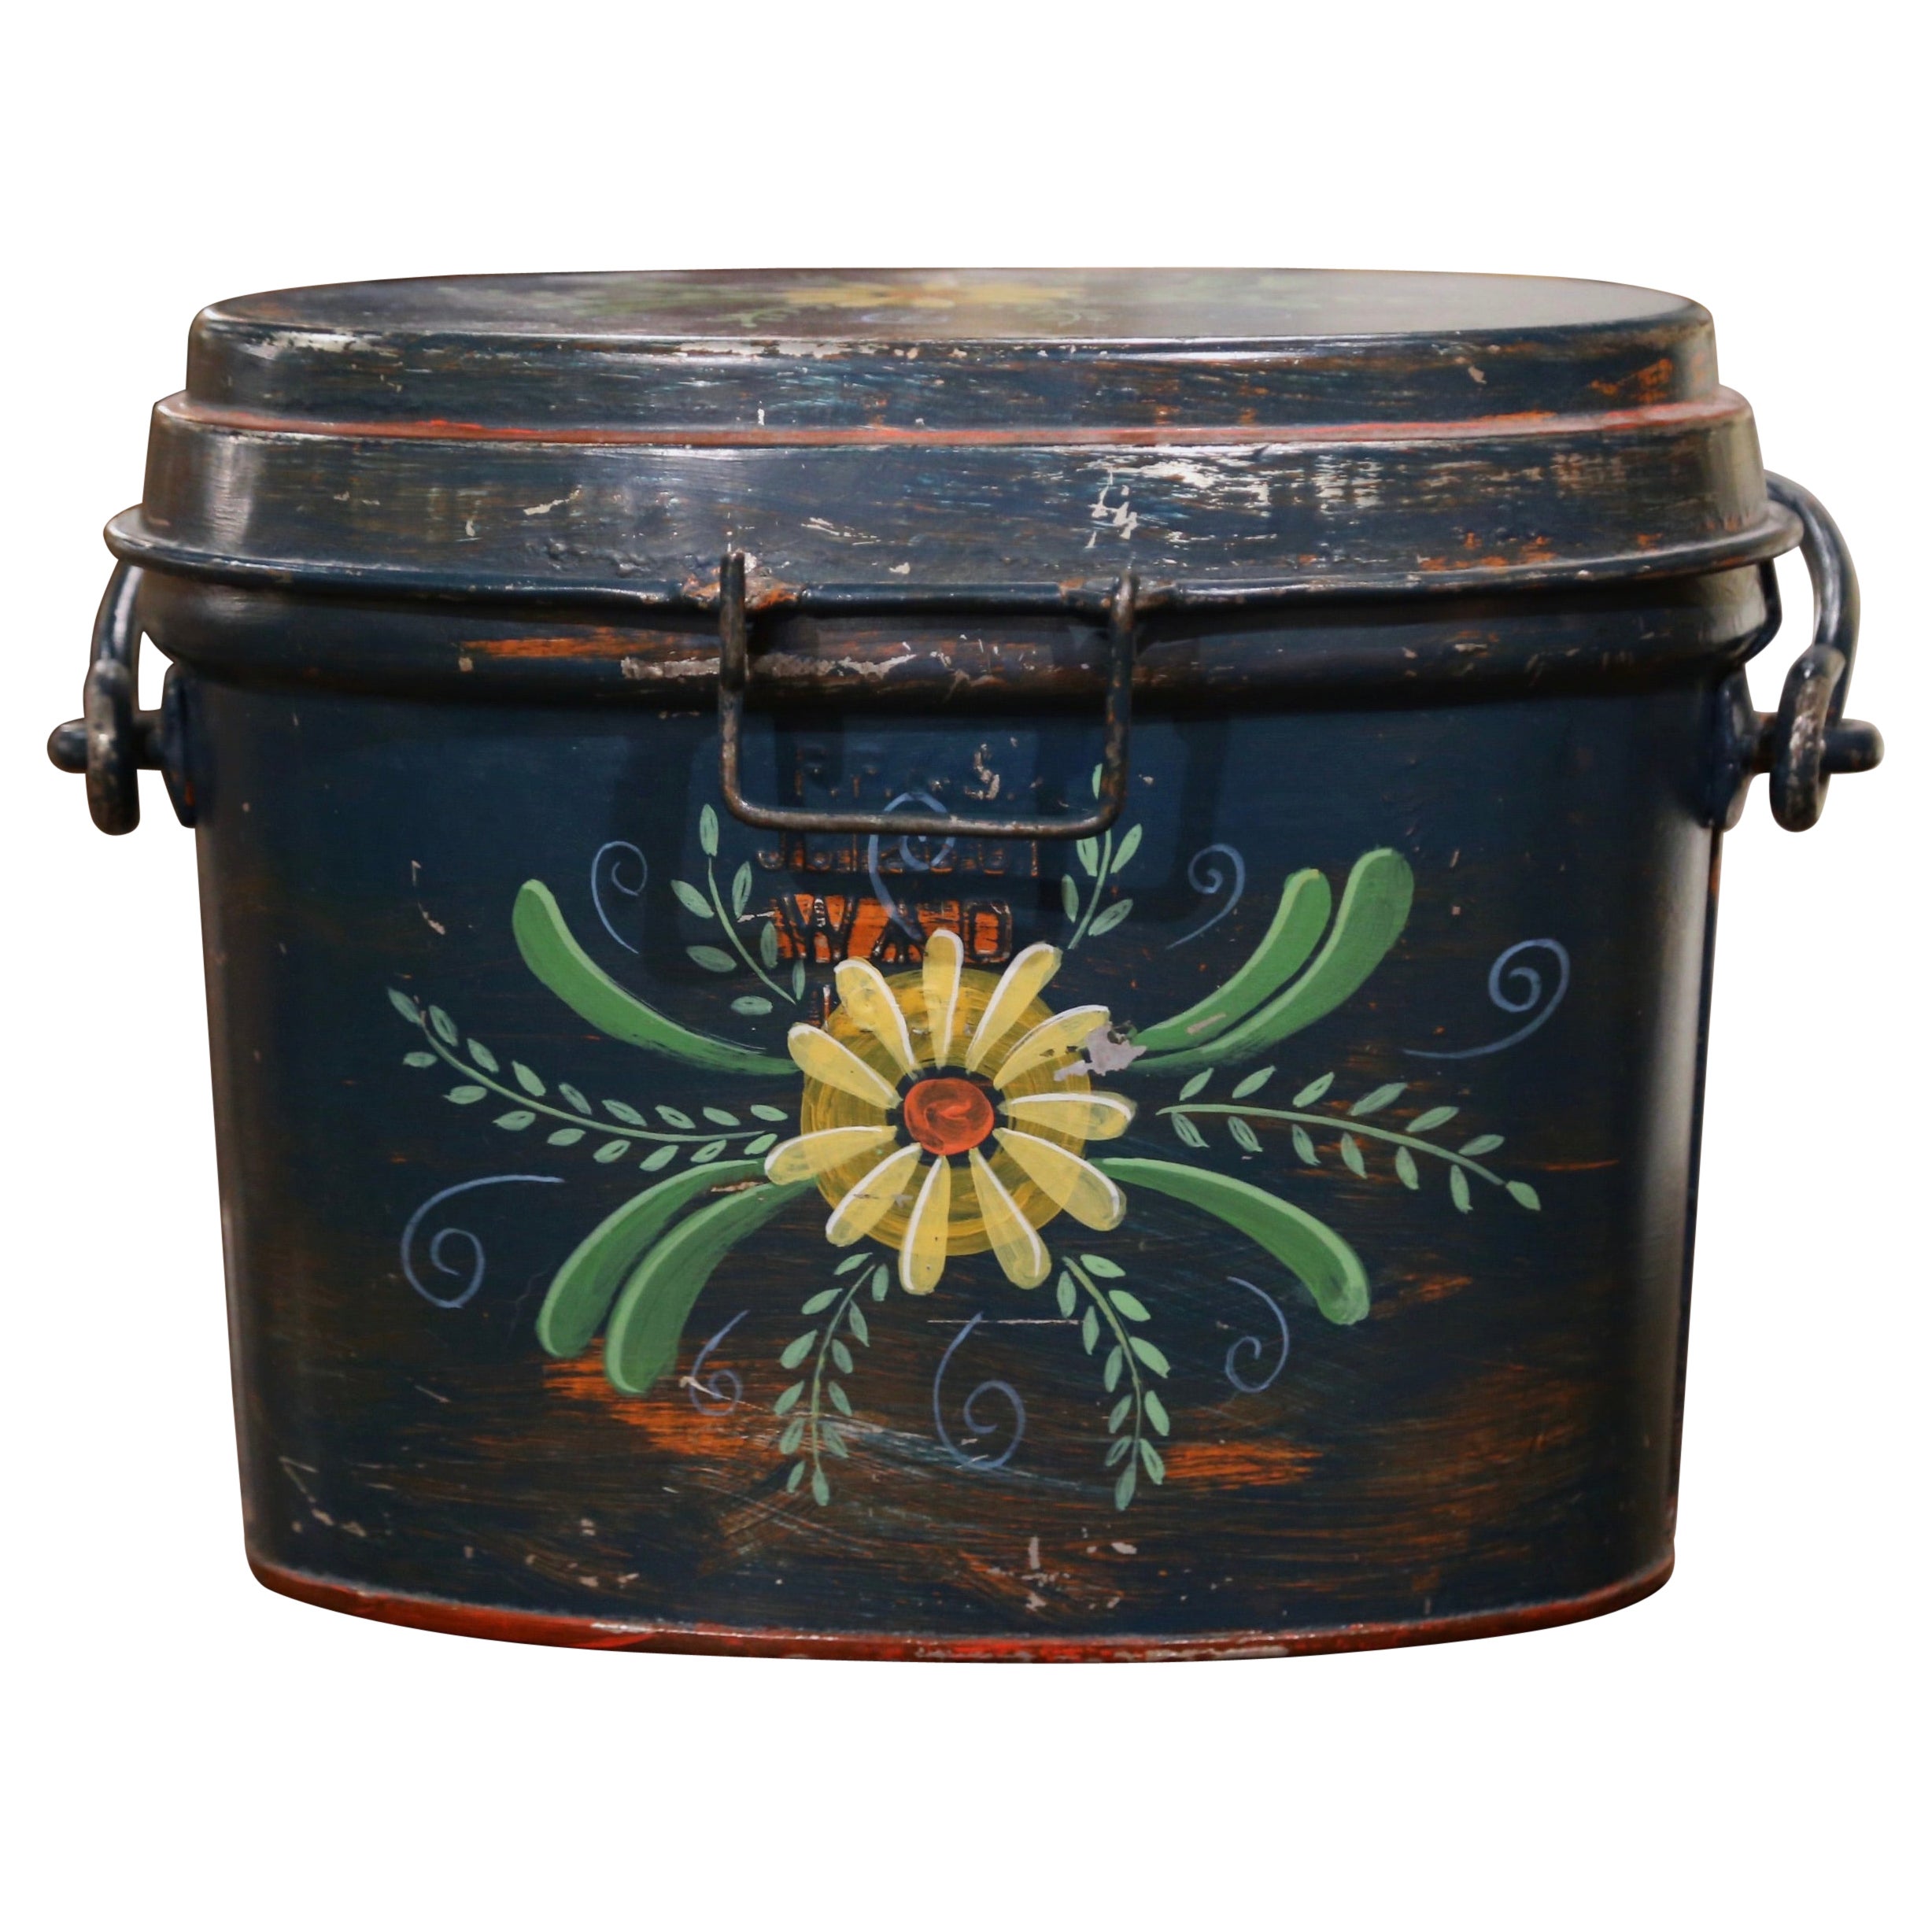 Mid-Century English Hand Painted Tole Bucket and Lid with Foliage Motifs